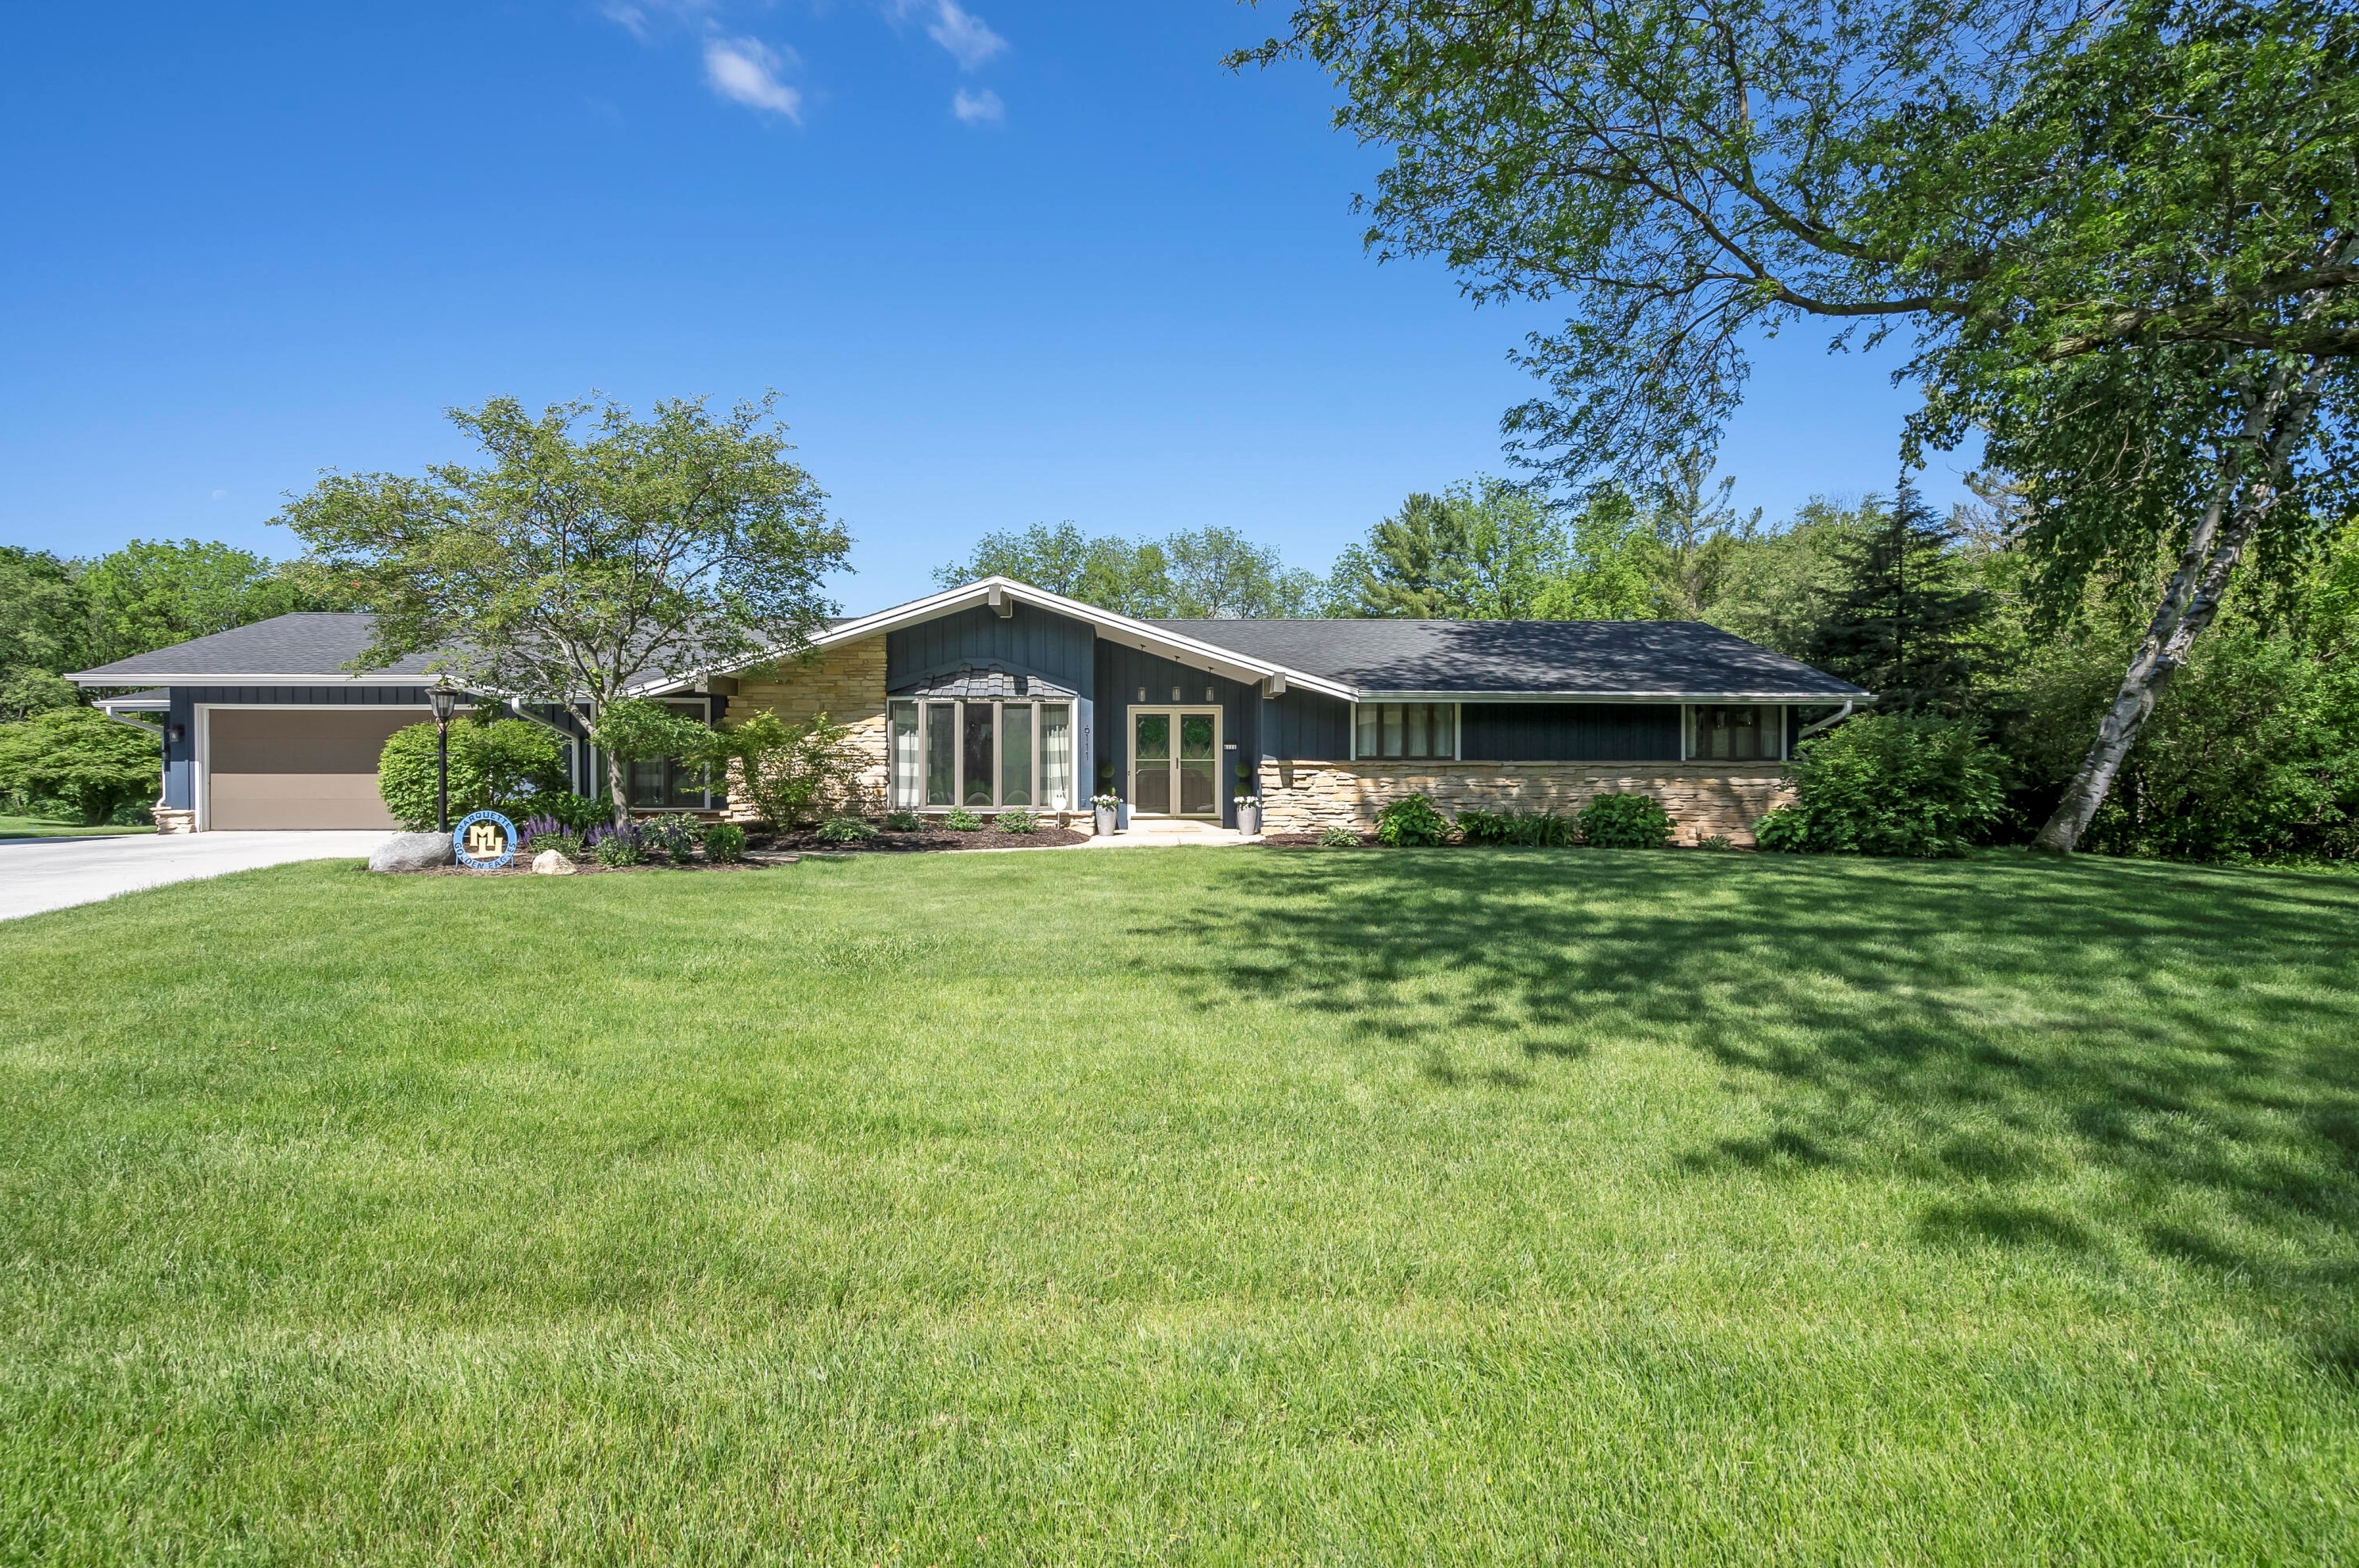 6111 Parkview Rd, Greendale, WI 53129